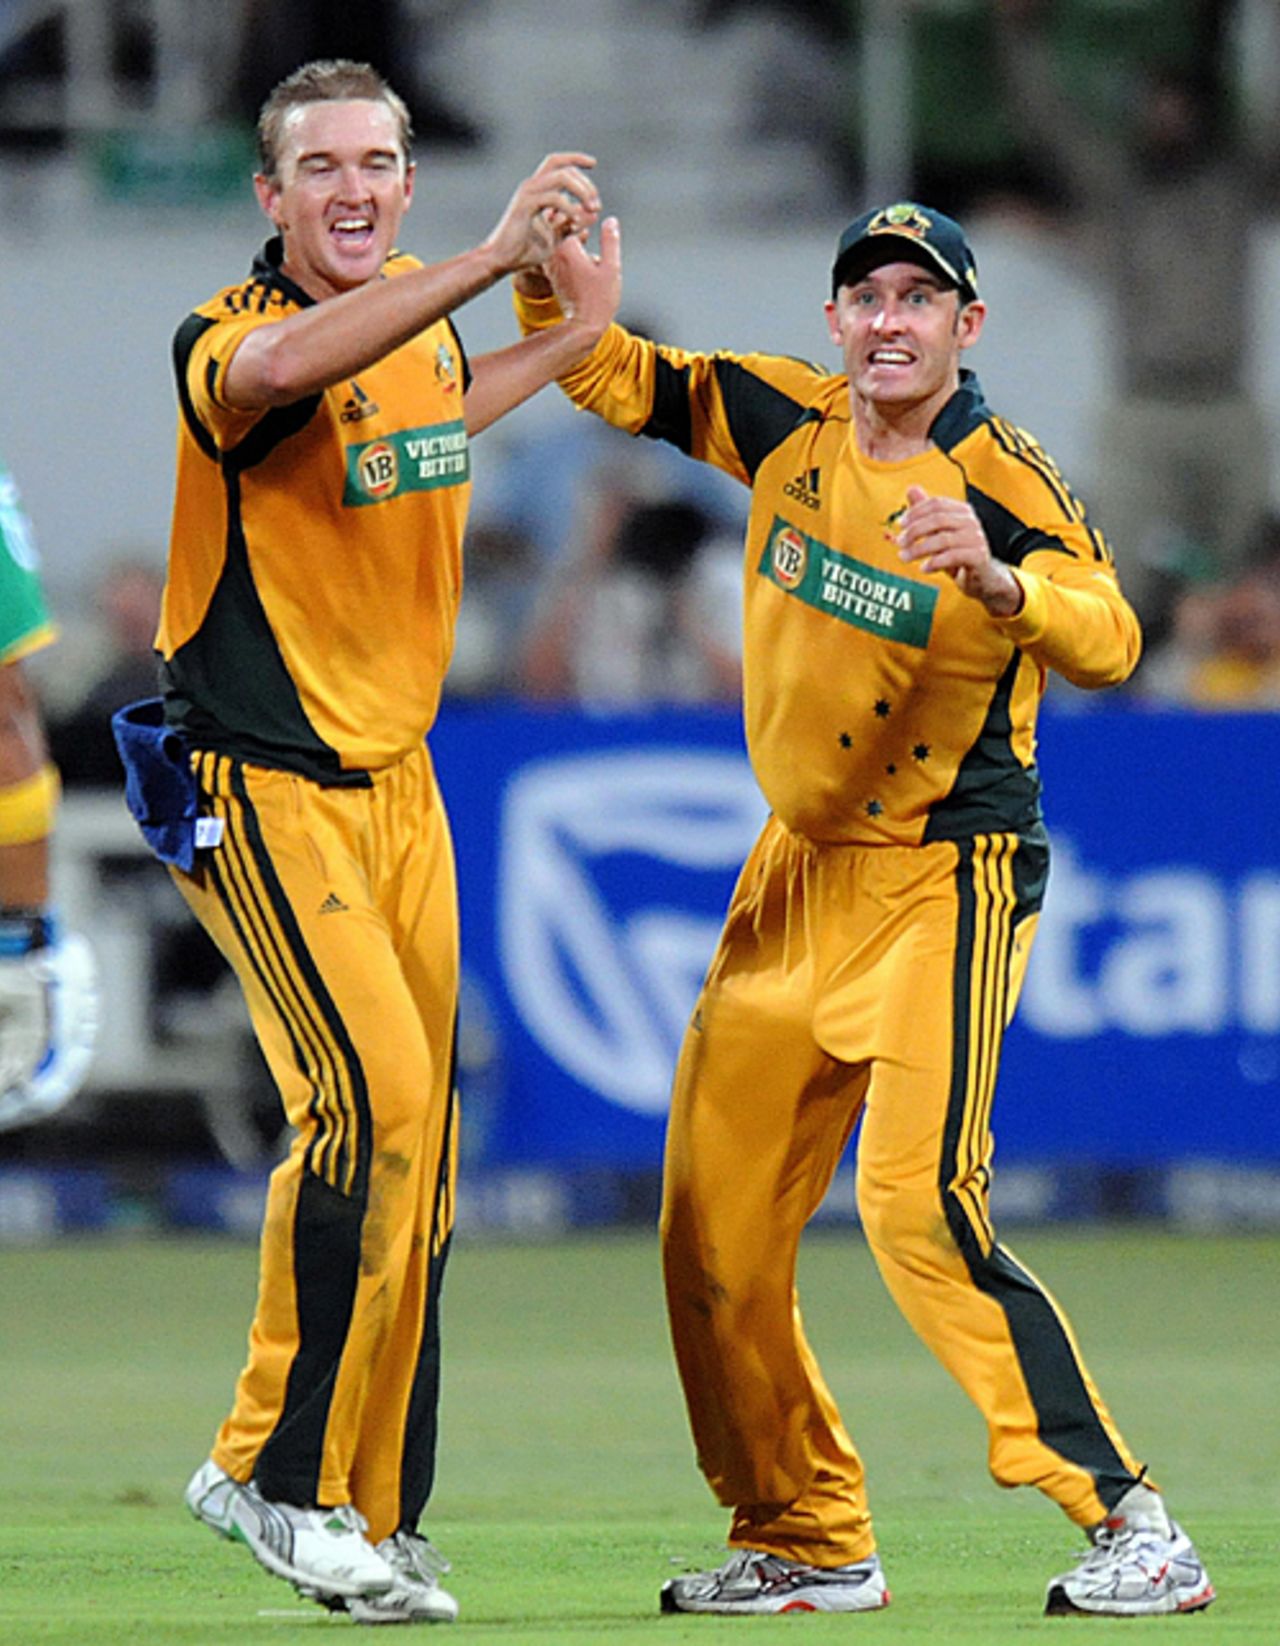 Michael Hussey congratulates Nathan Hauritz on picking up Graeme Smith's wicket, South Africa v Australia, 1st ODI, Durban, April 3, 2009